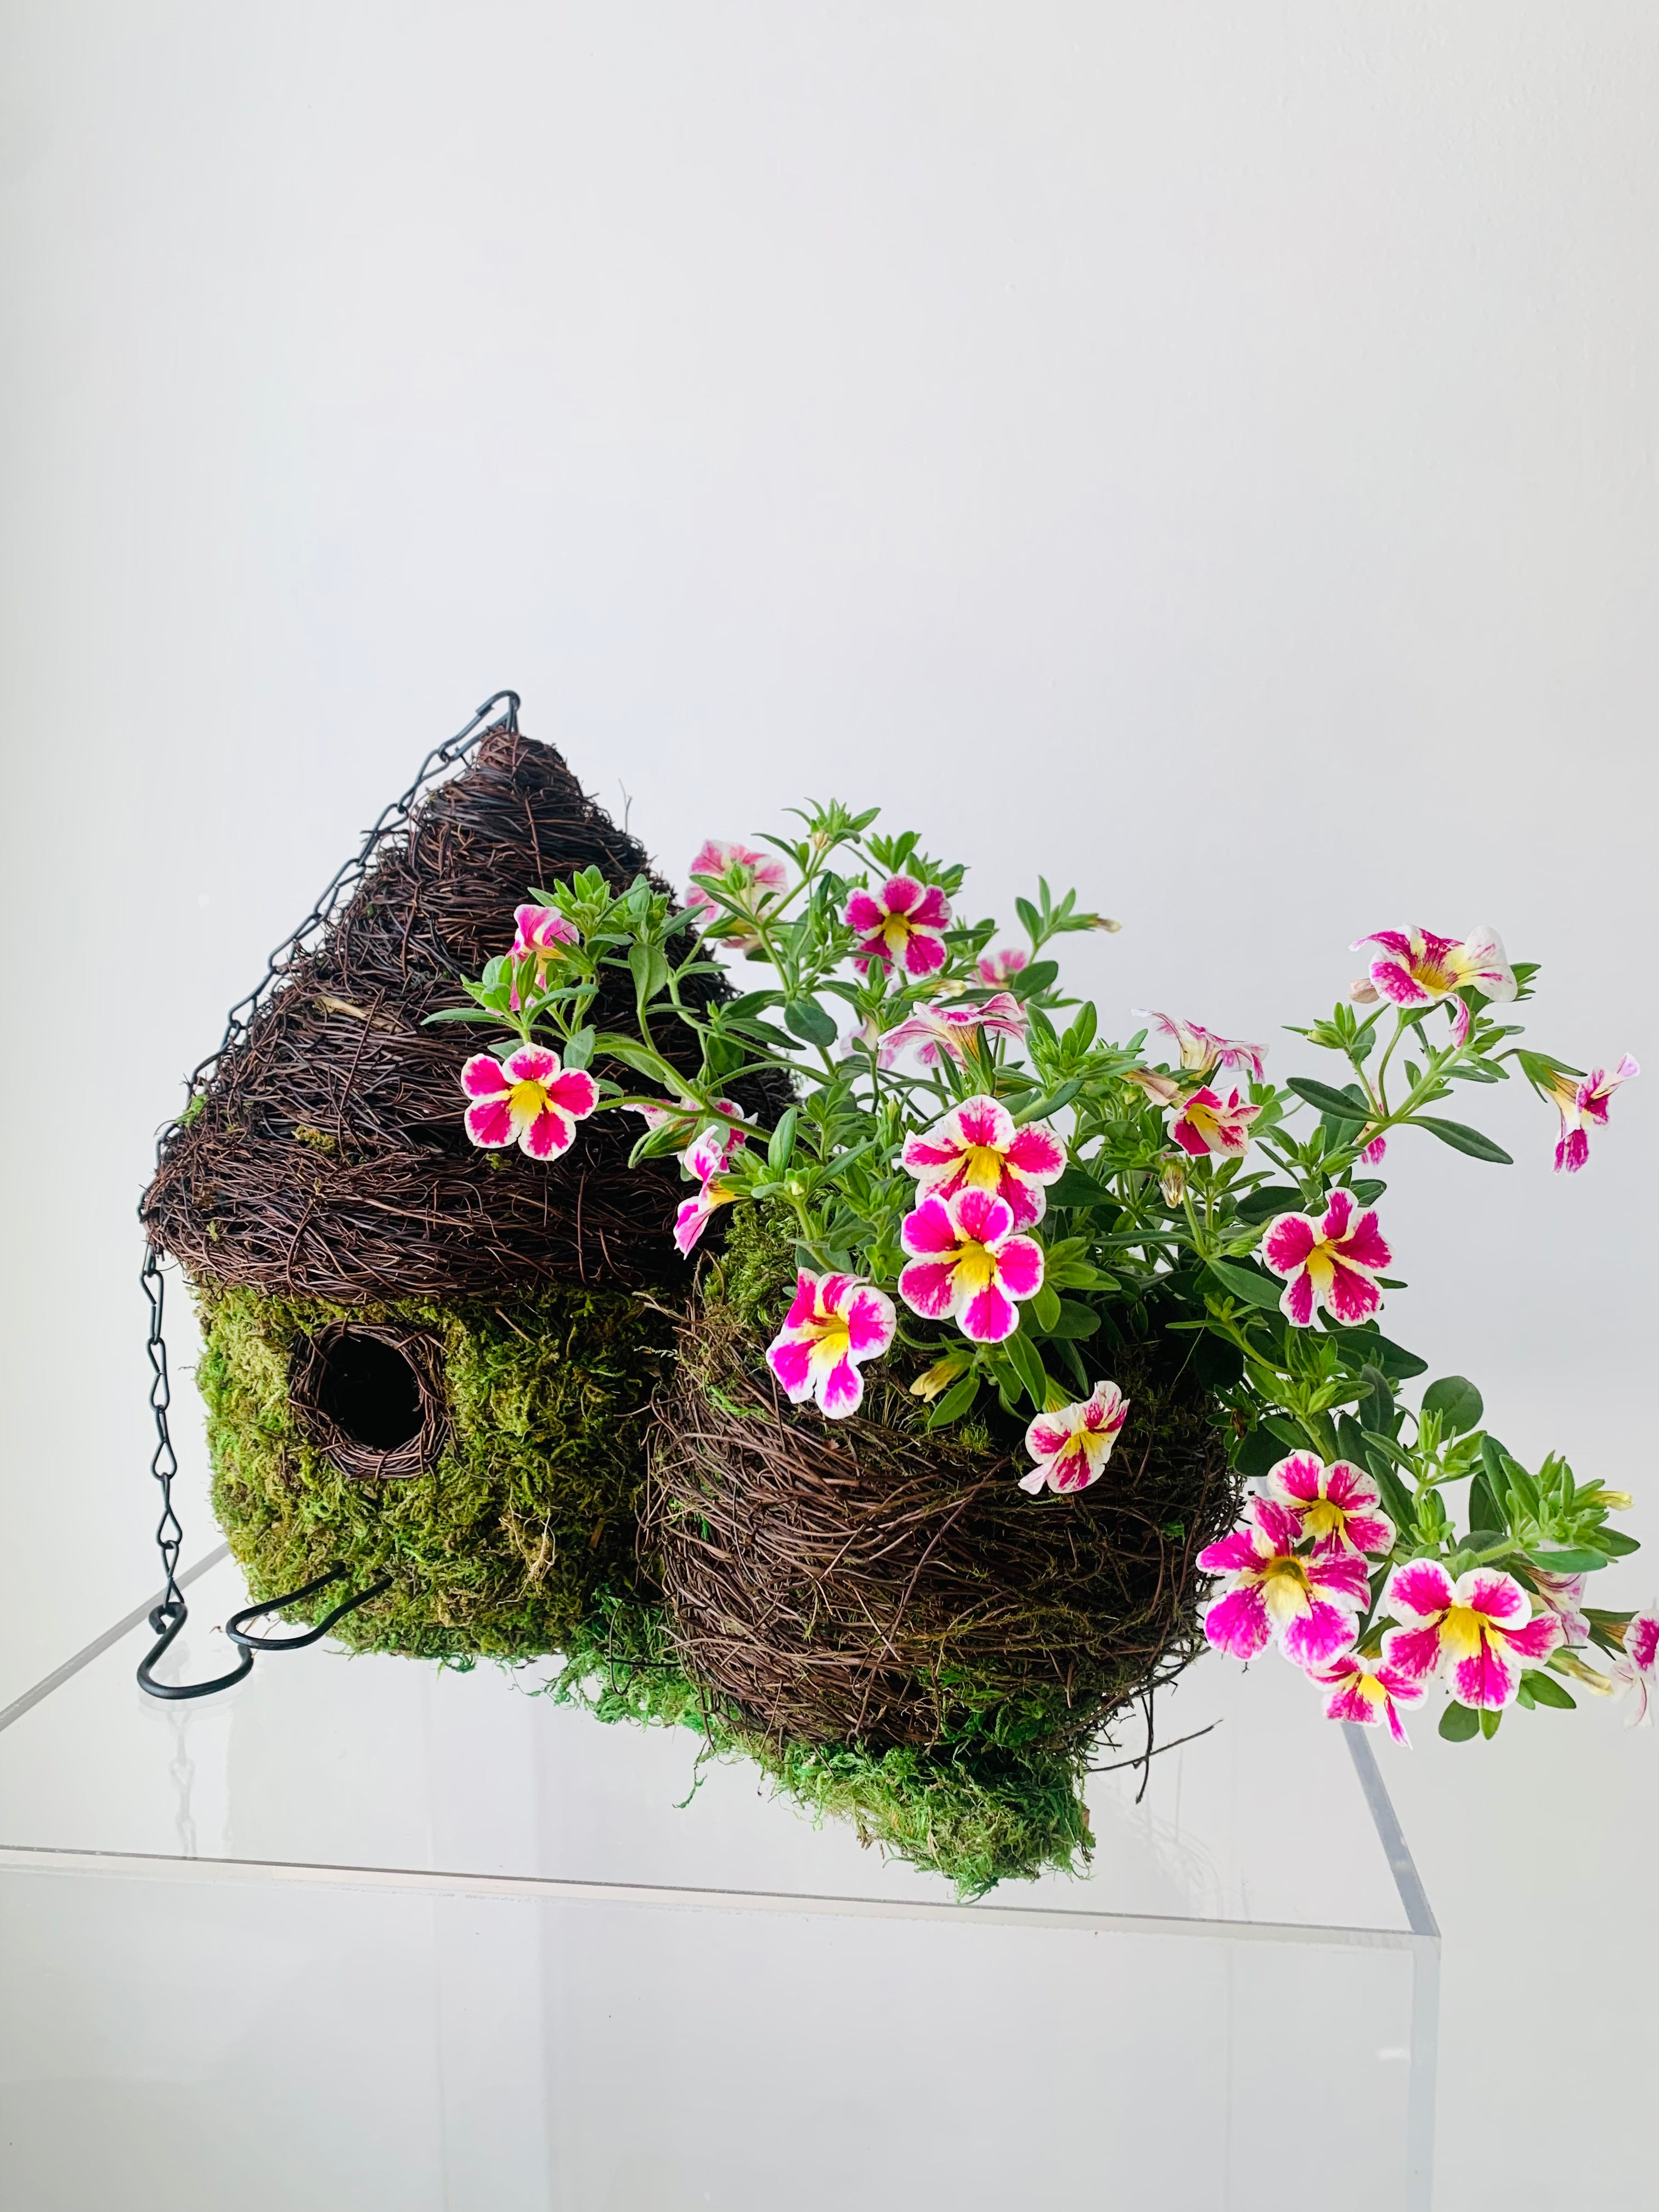 A beautiful woven bird house with an attached potted flower arrangement by Takaya Sato 